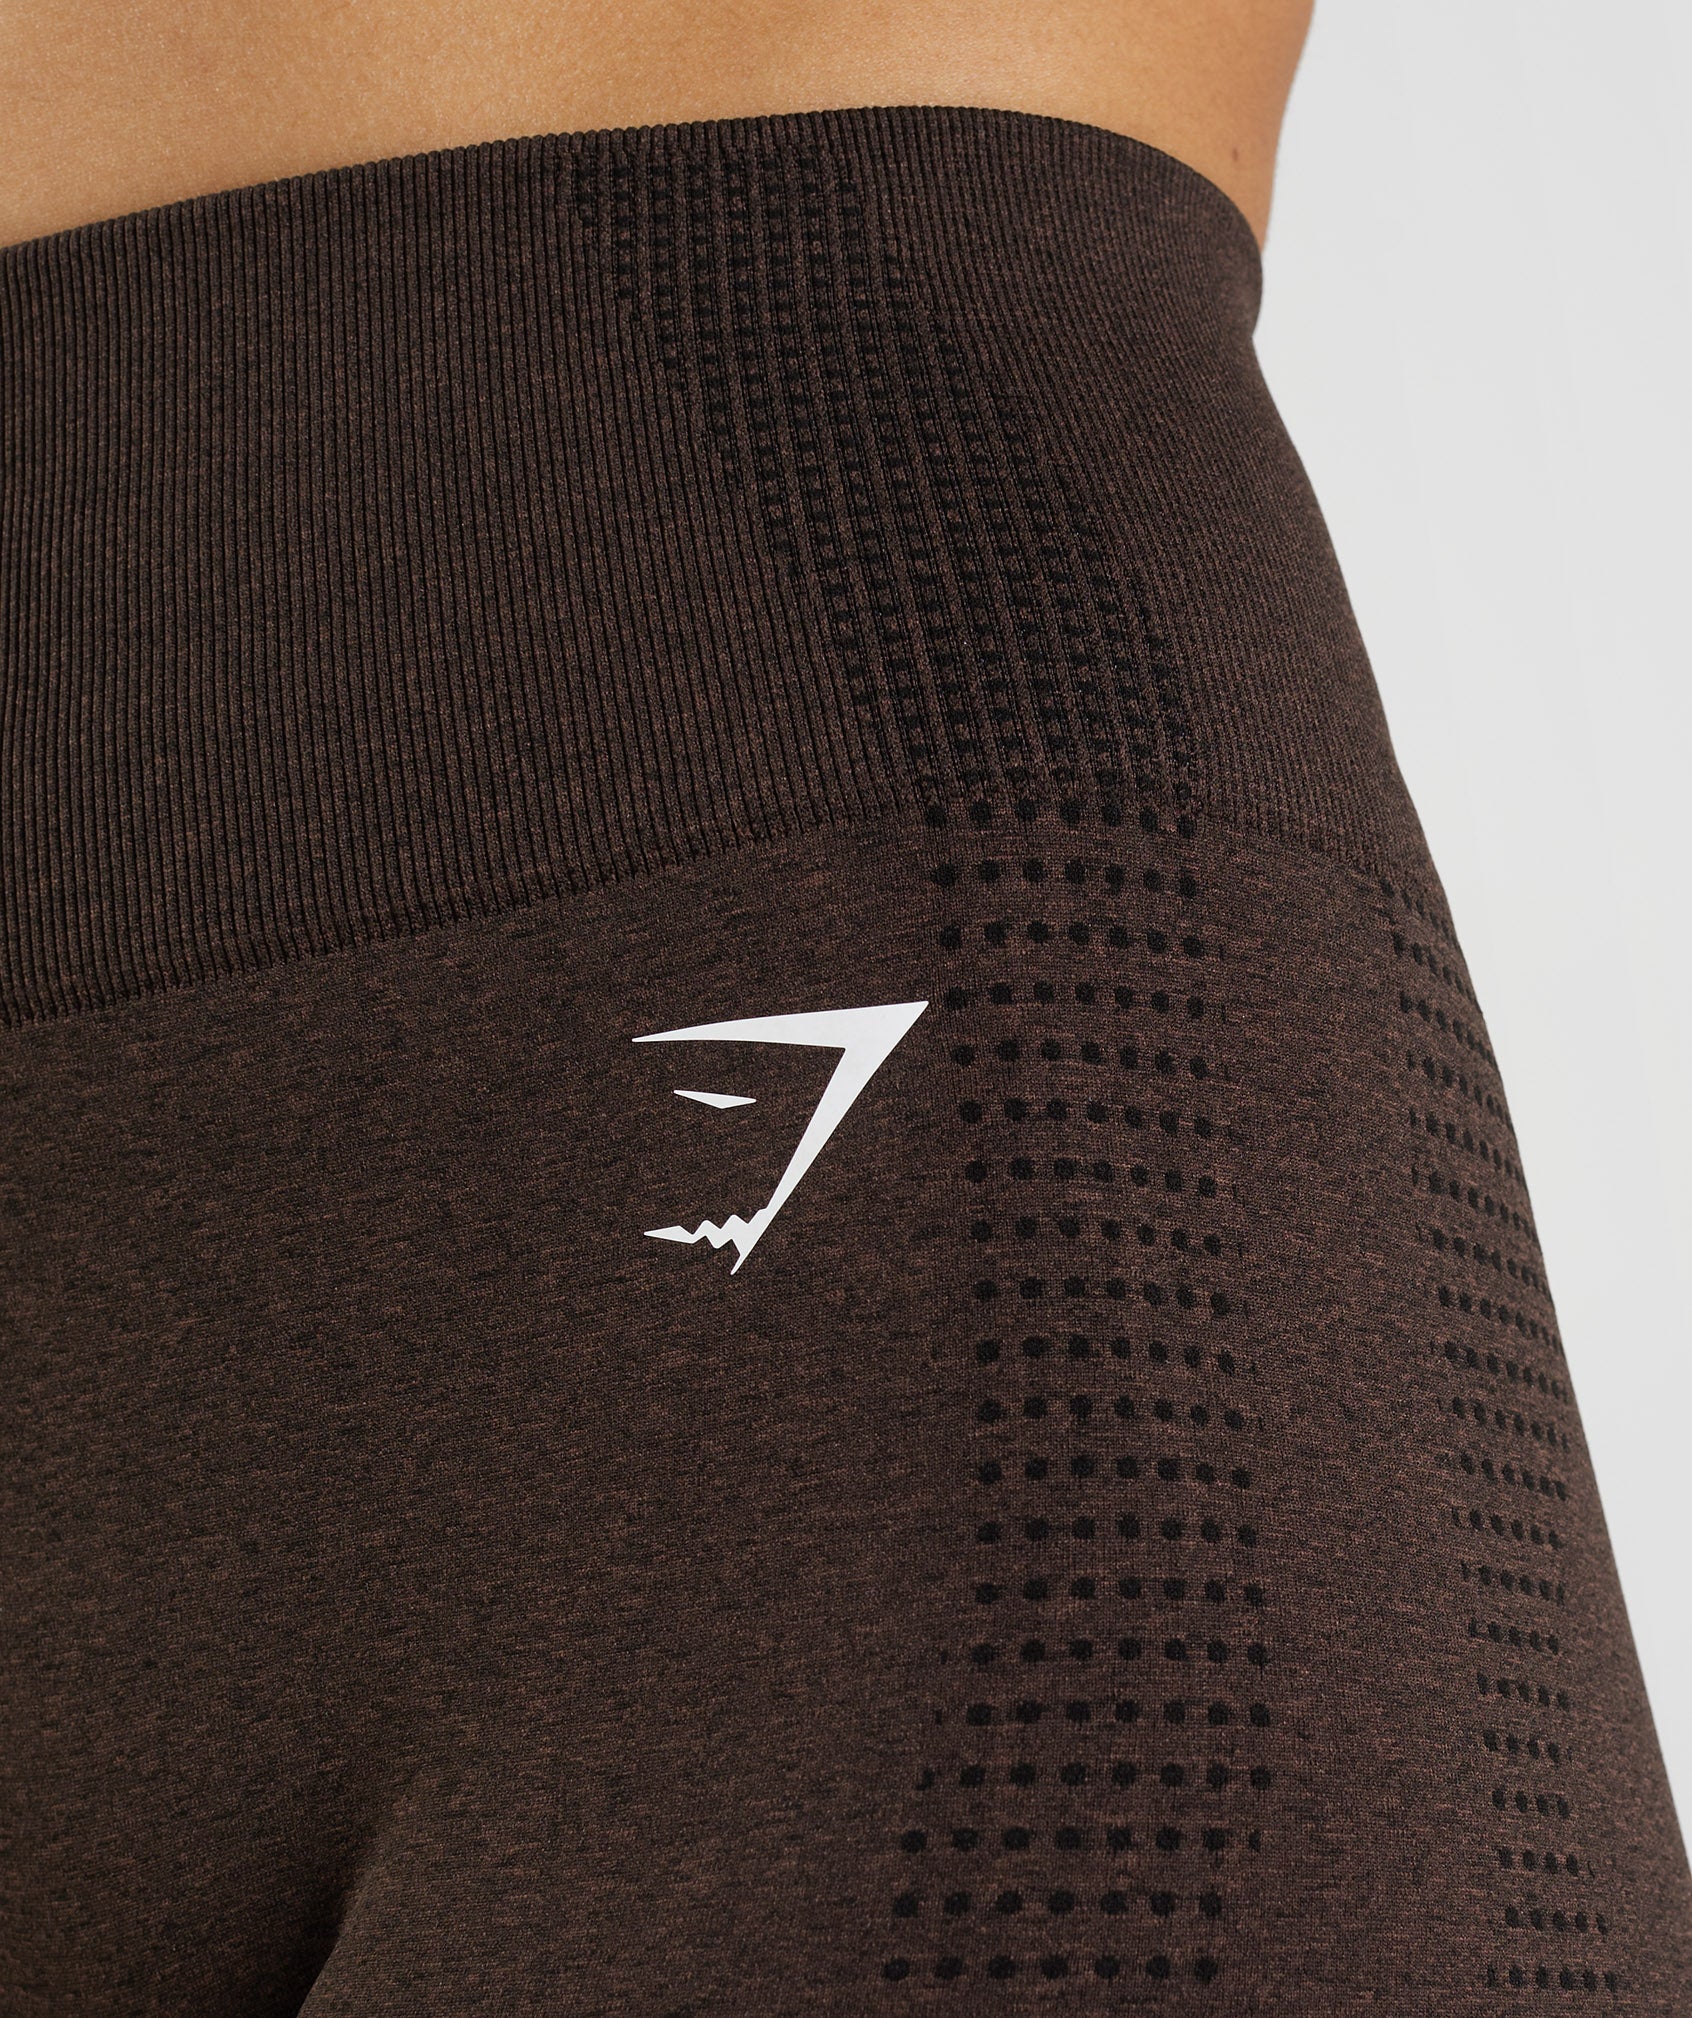 Vital Seamless 2.0 Shorts in Cherry Brown Marl - view 7